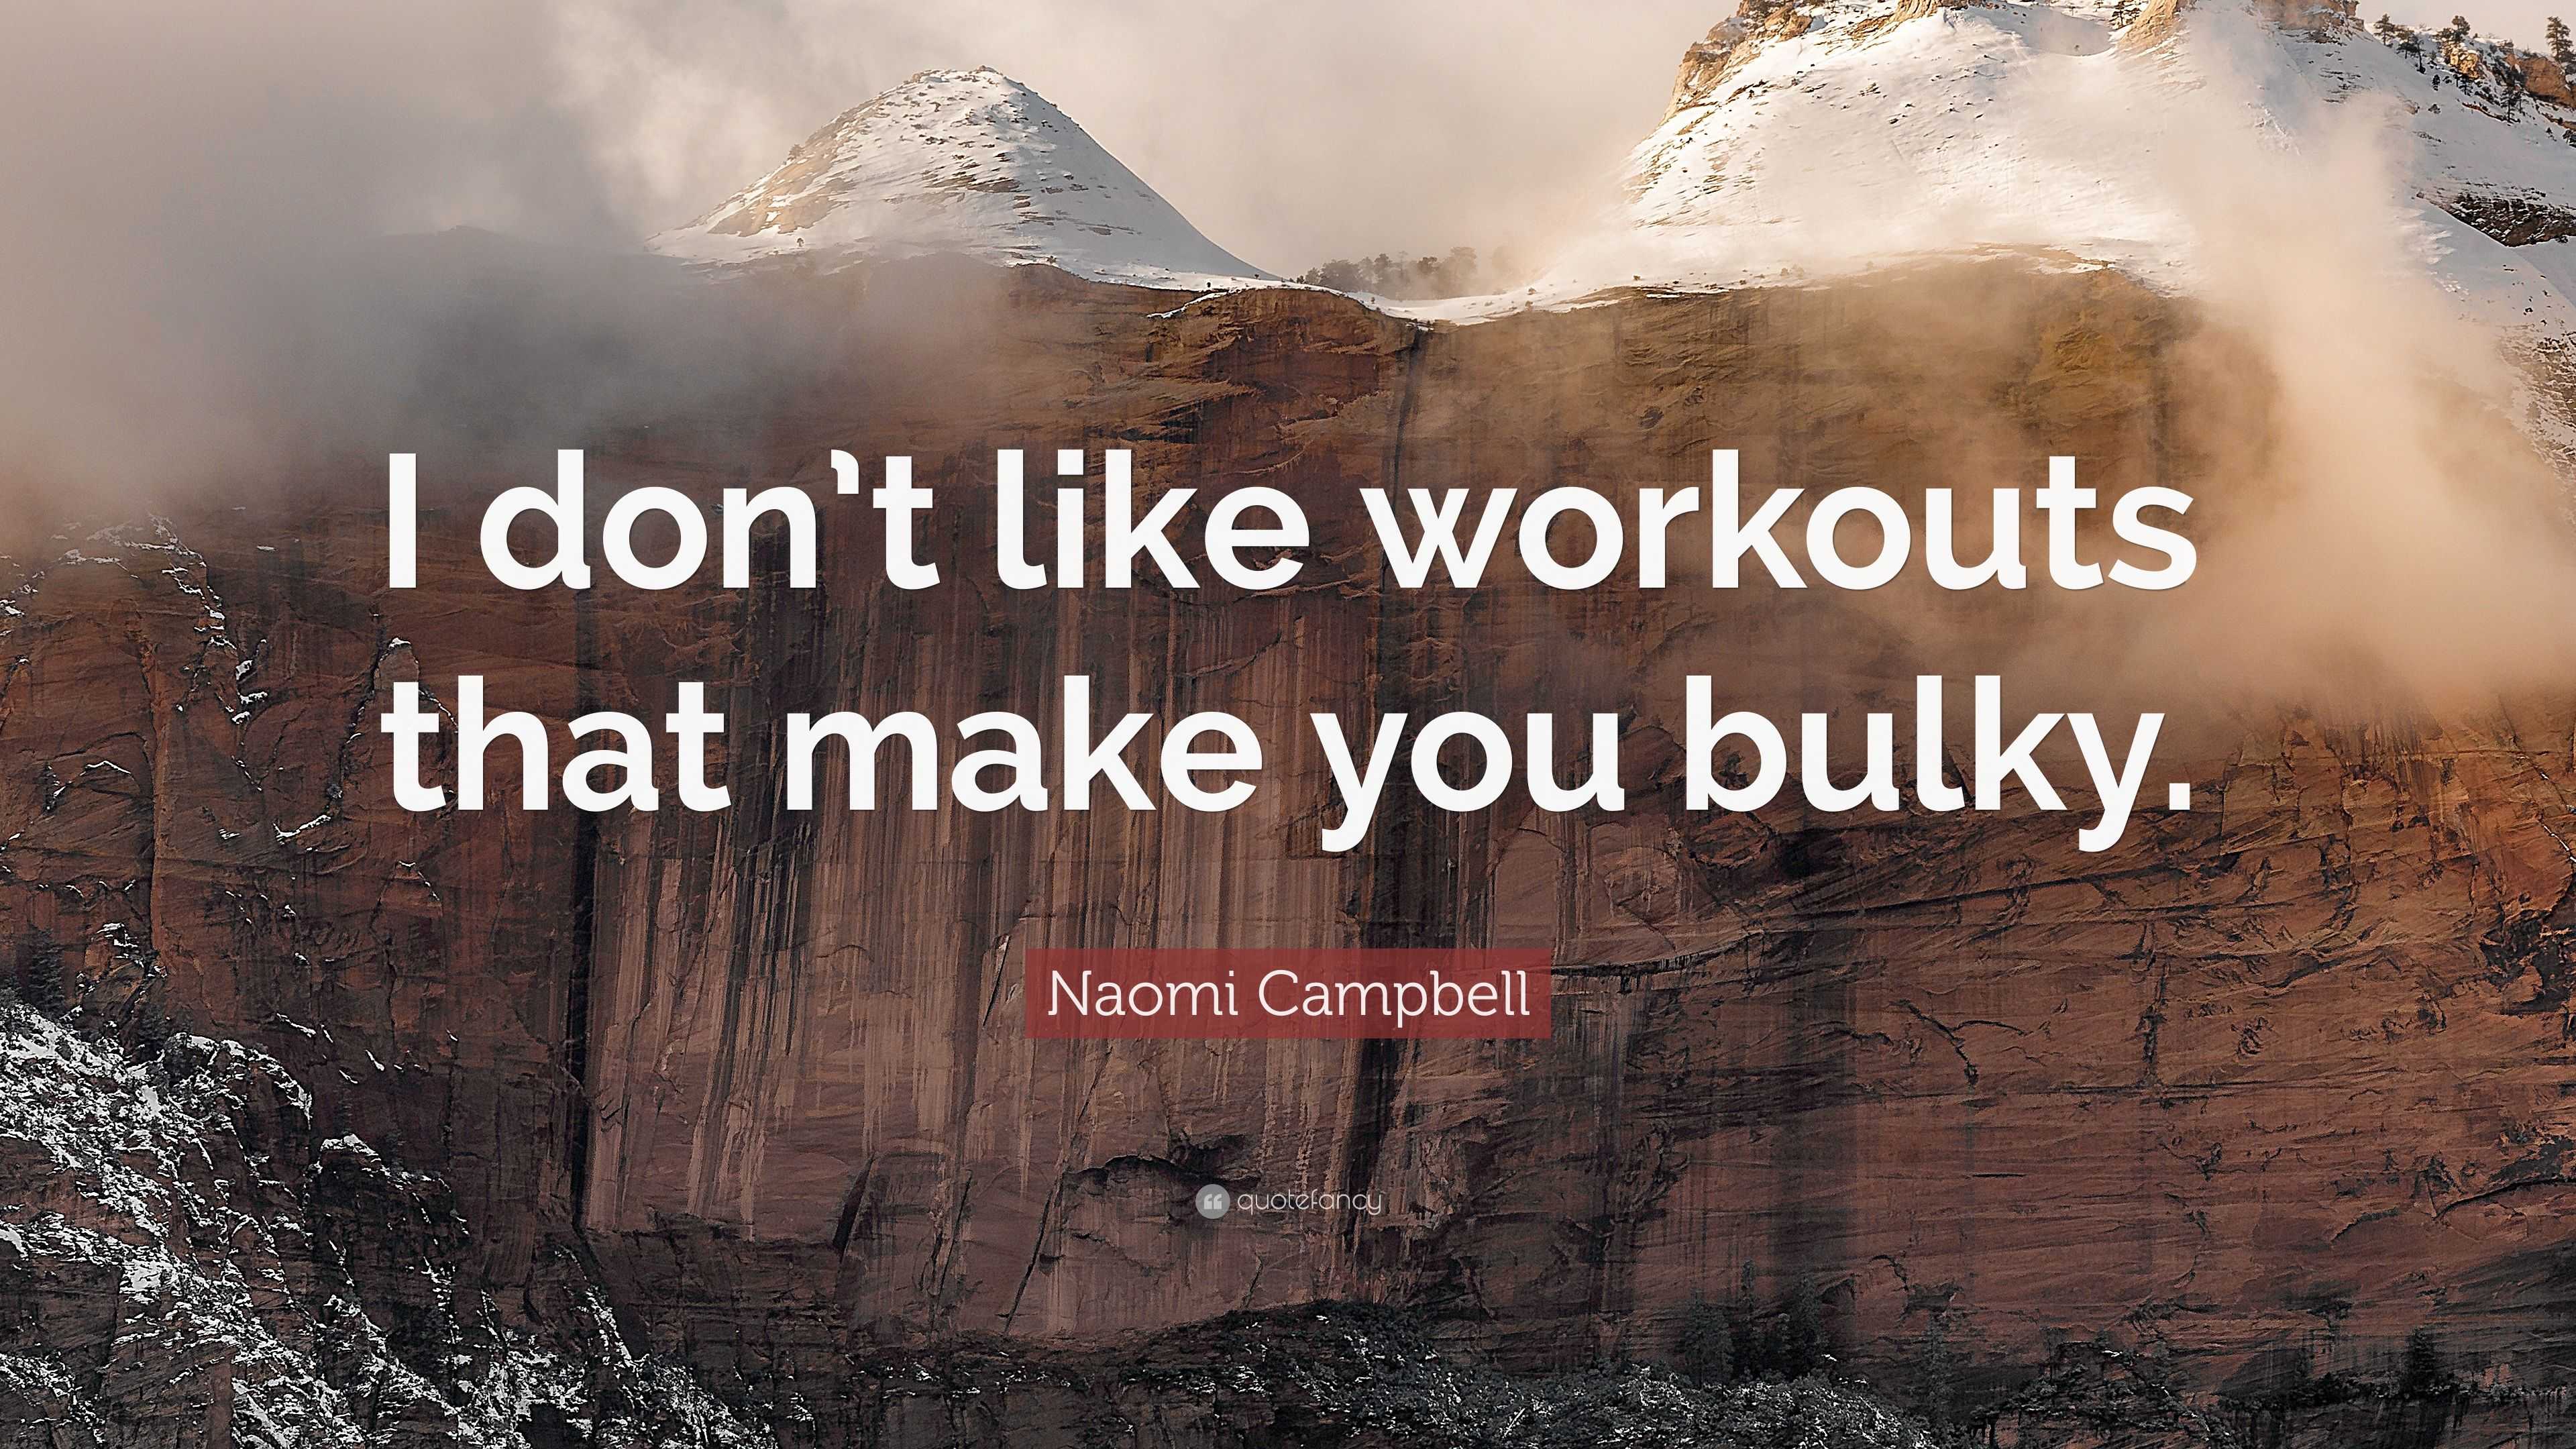 Naomi Campbell Quote: “I don't like workouts that make you bulky.”